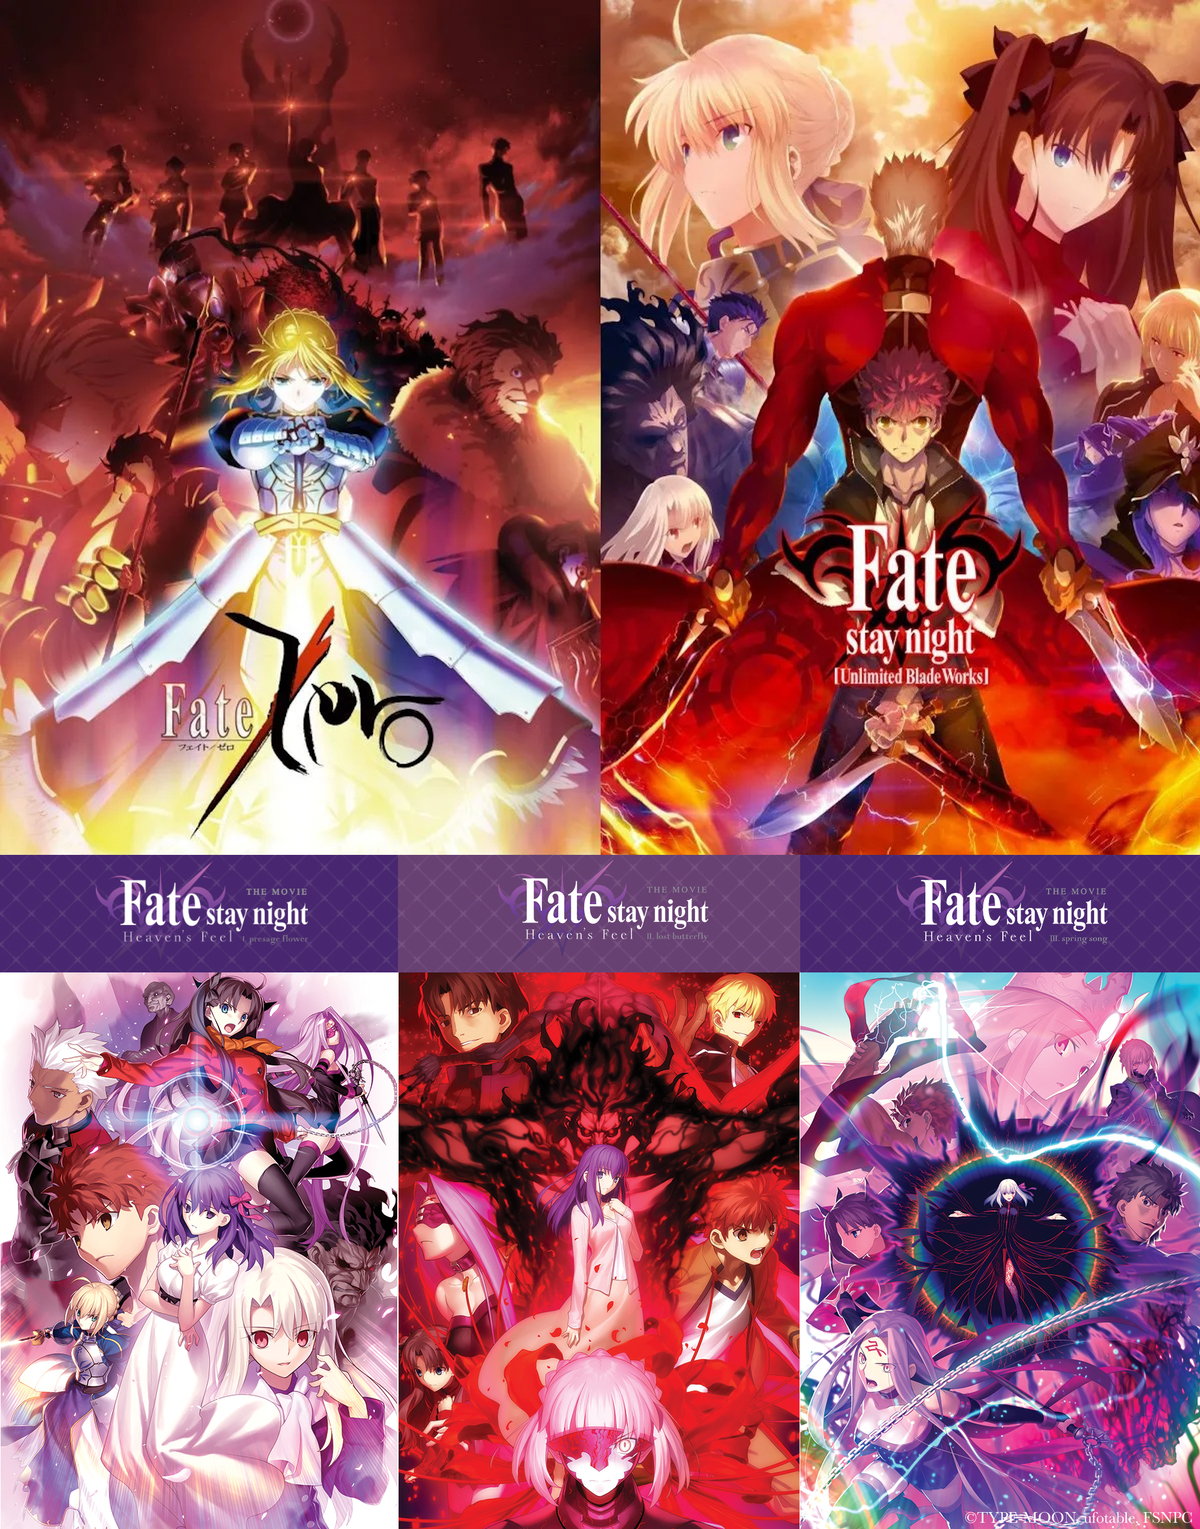 Set combo anime Sony: "Fate" by Aniplex feat ufotable